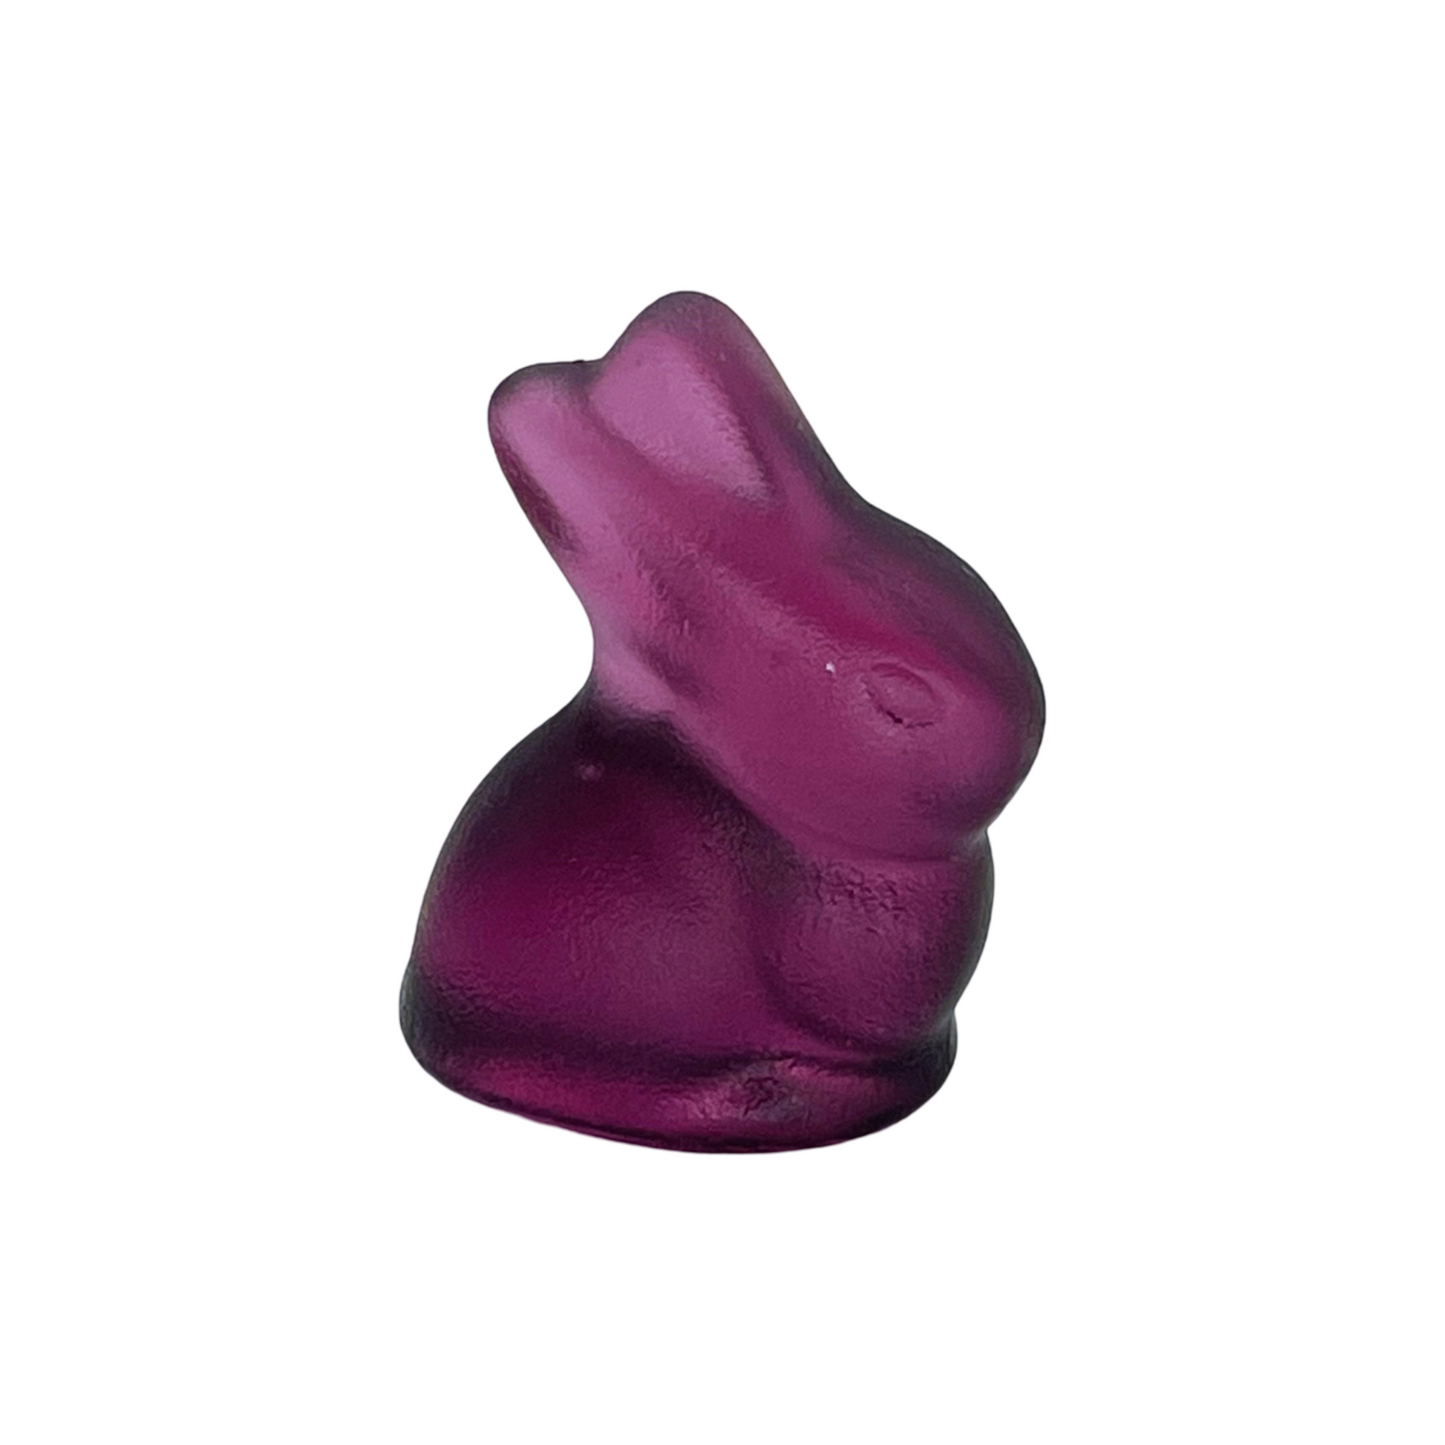 Exciting coloured cast glass bunnies